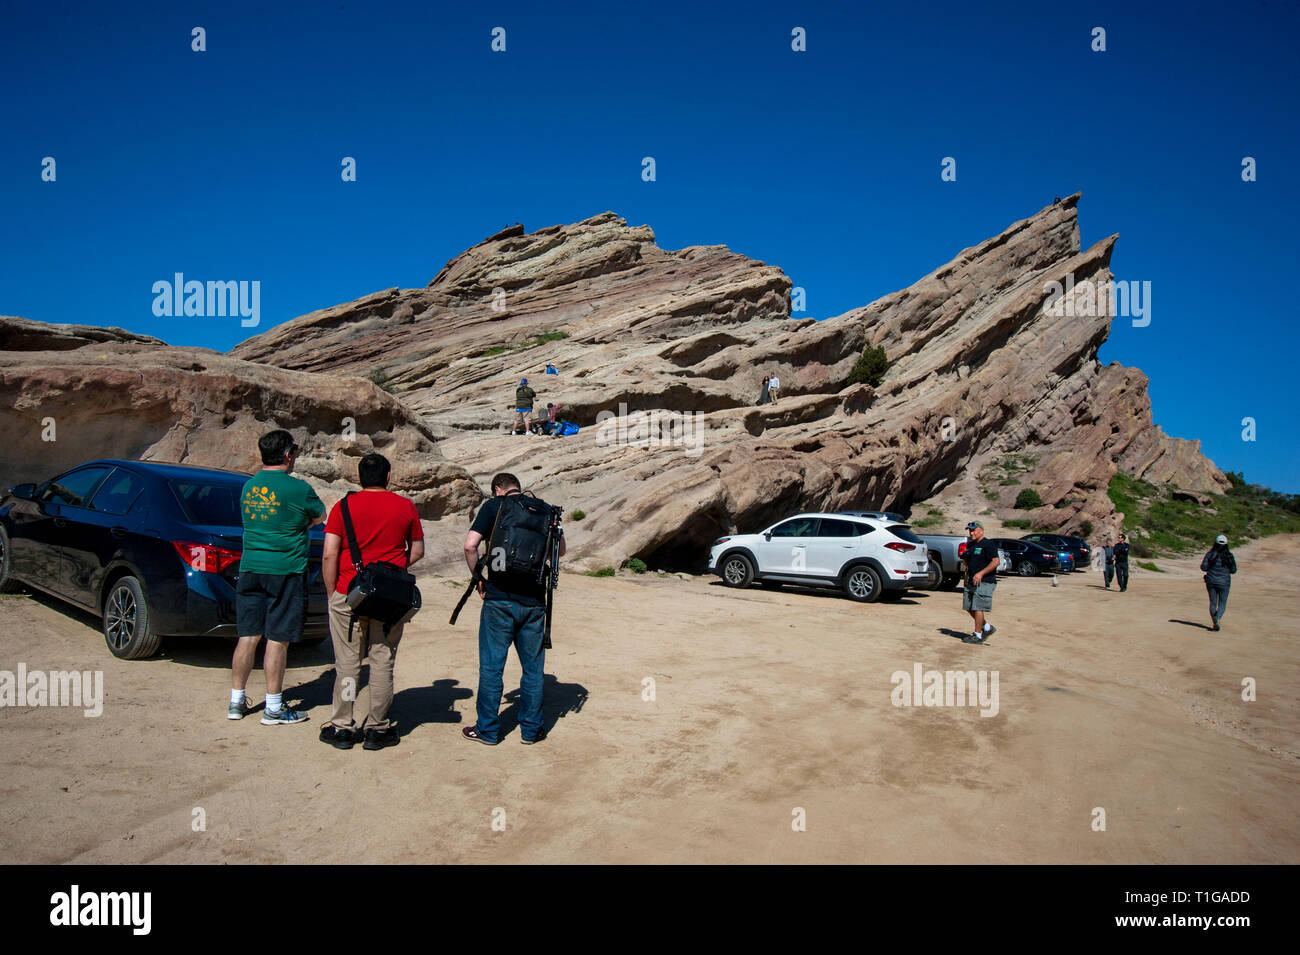 People visiting Vasquez Rocks near Agua Dulce in the Antelope Valley area of Southern California. Stock Photo